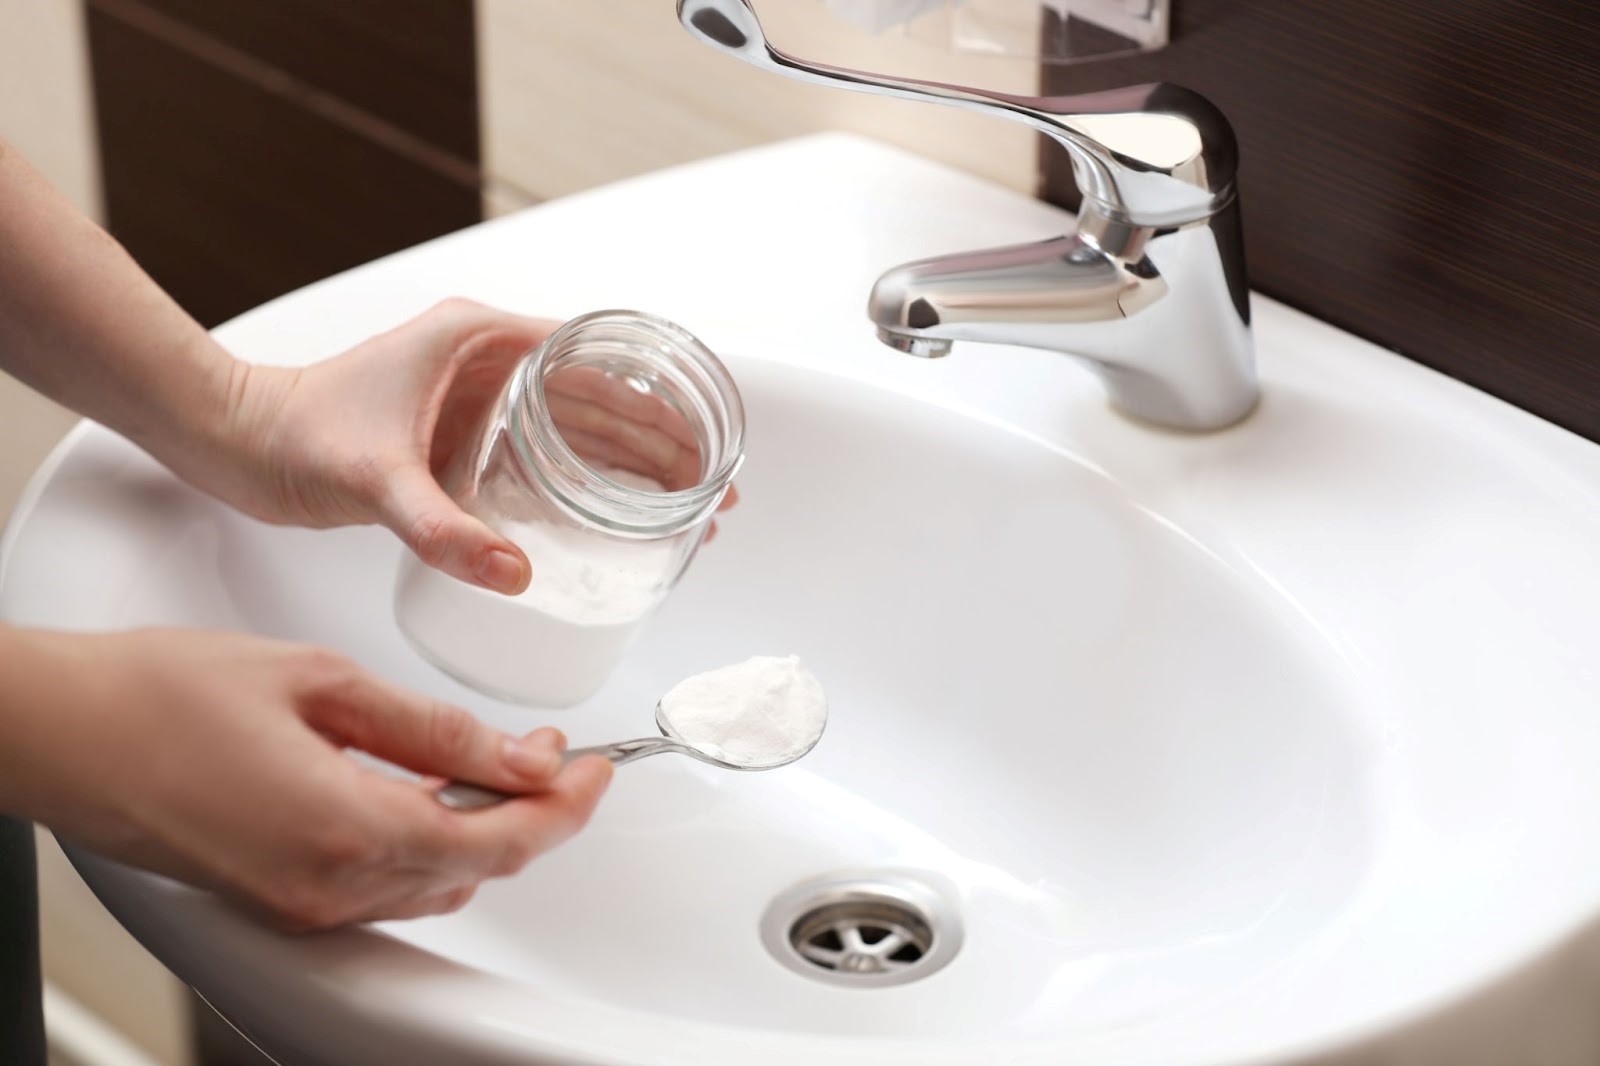 How To Unclog A Bathroom Sink